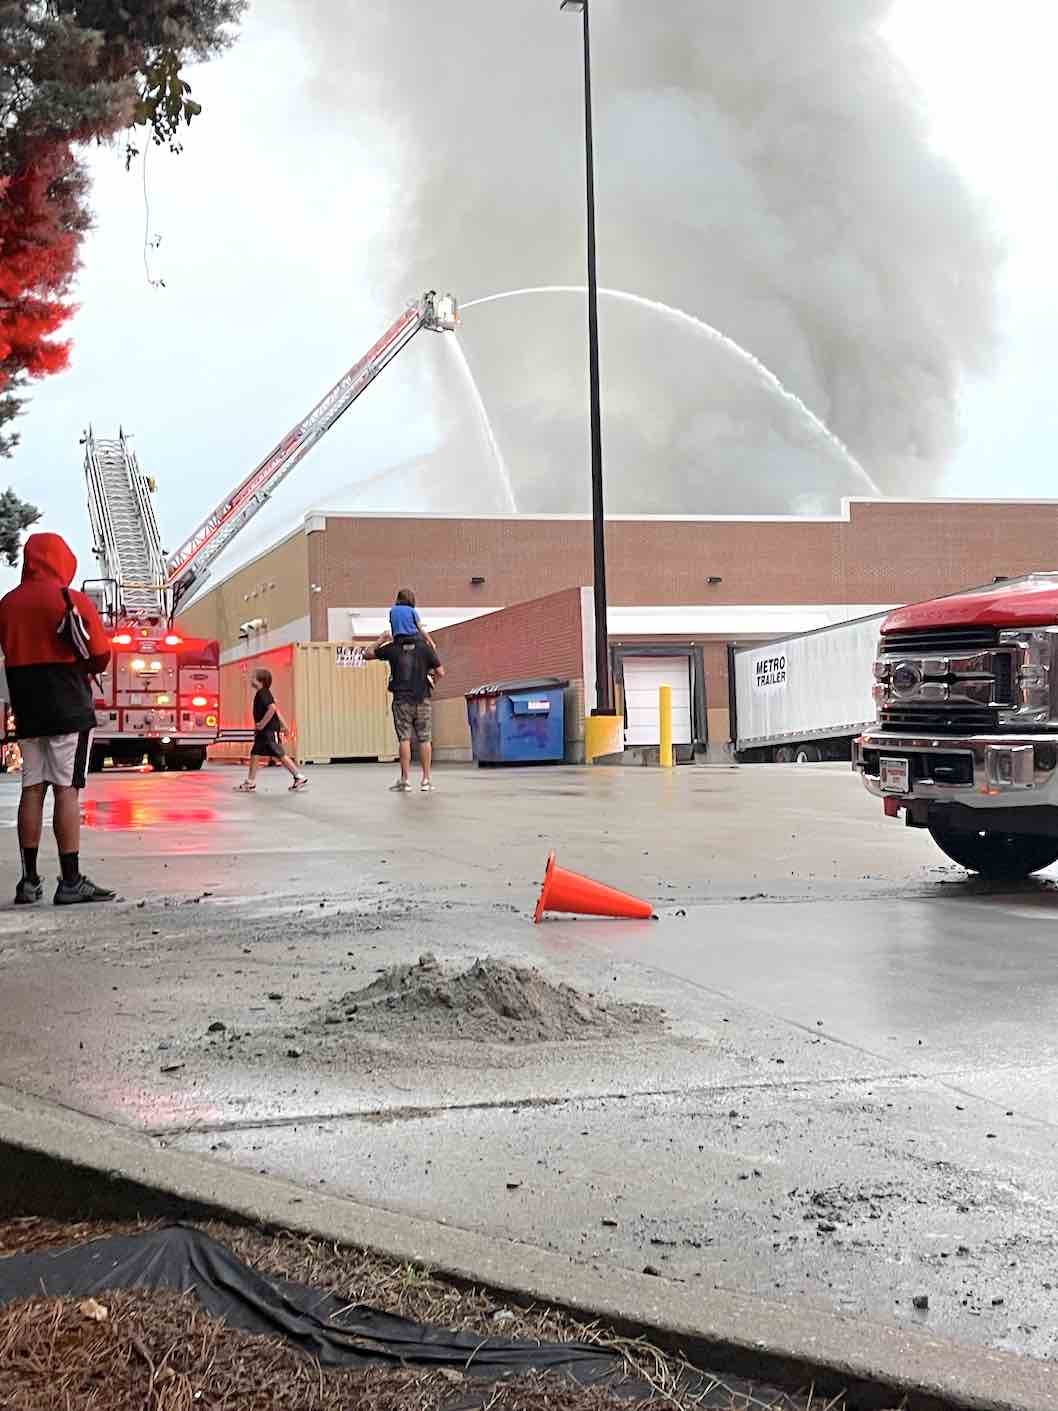 Civilians watch as firefighters pour water into the back-store blaze at Walmart. Photo by Carol Kurpiel.